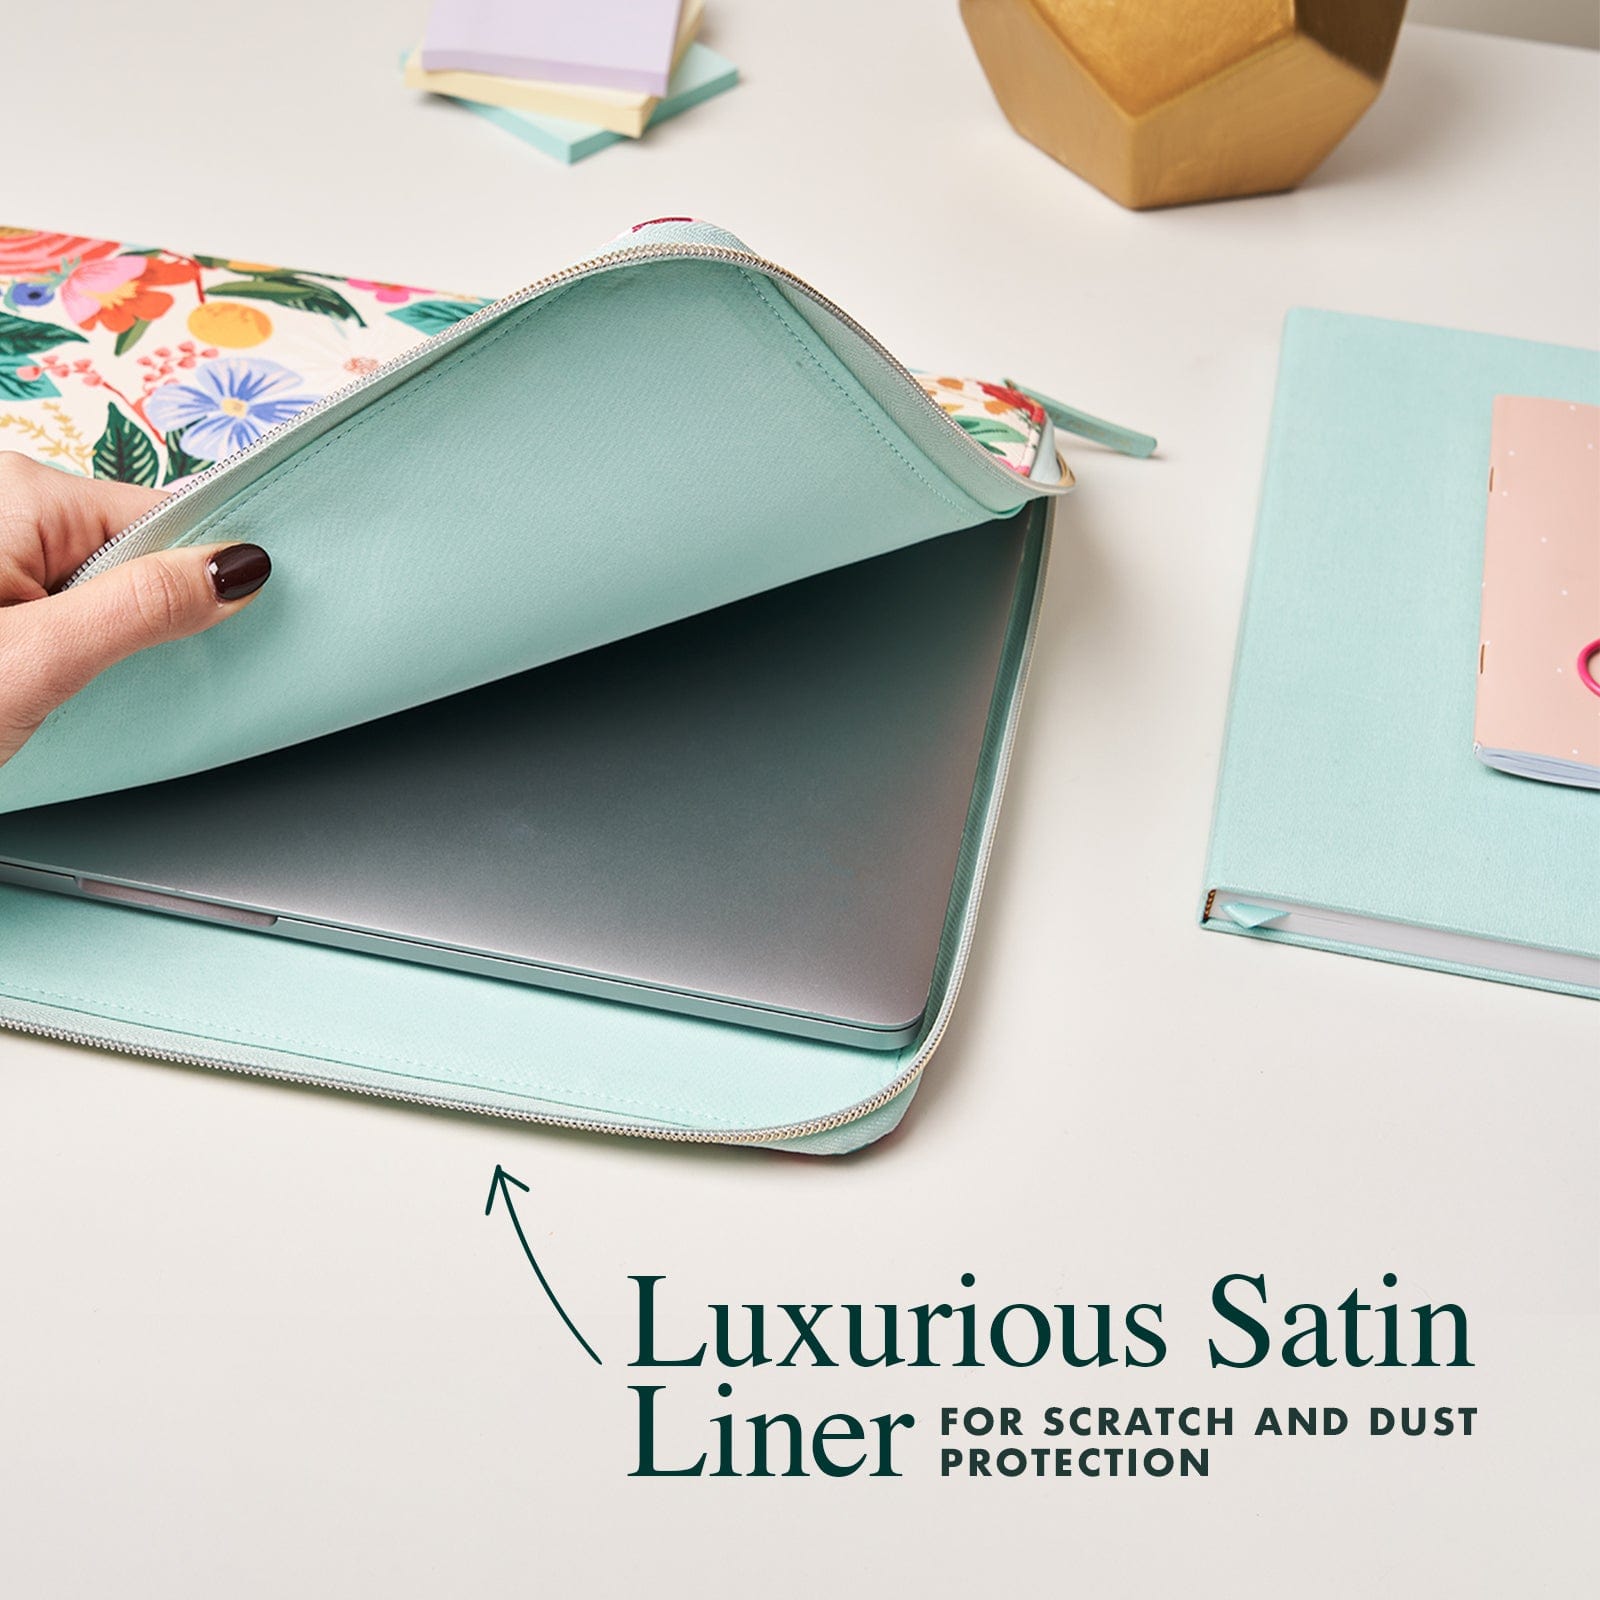 LUXURIOUS SATIN LINER FOR SCRATCH AND DUST PROTECTION